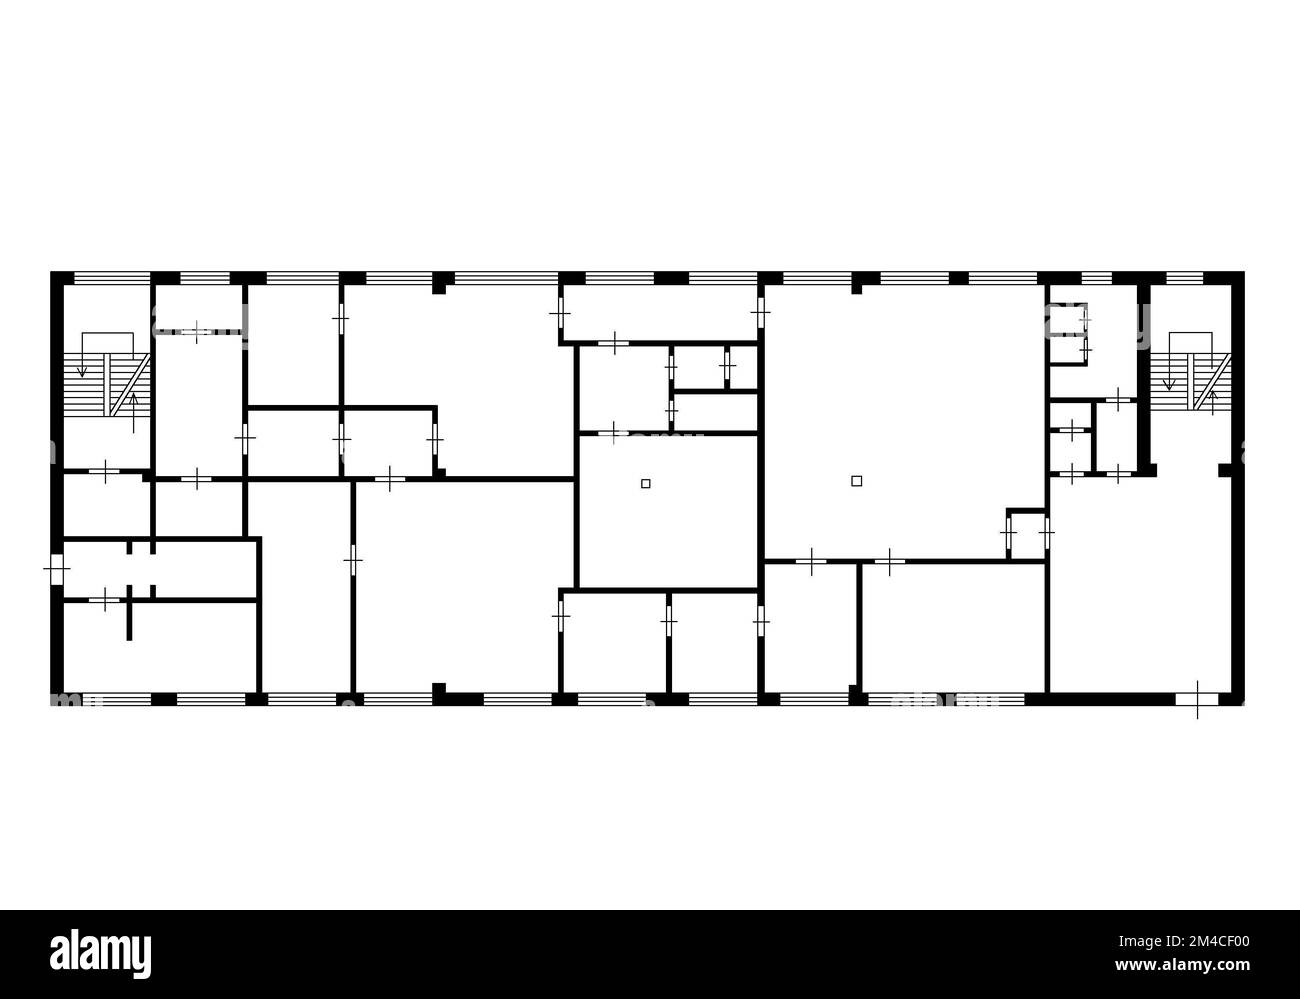 Drawing floorplan. 2d floor plan. Black&white floor plan. House with interior, floor plan, blueprints and colored walls on a white background. Stock Photo